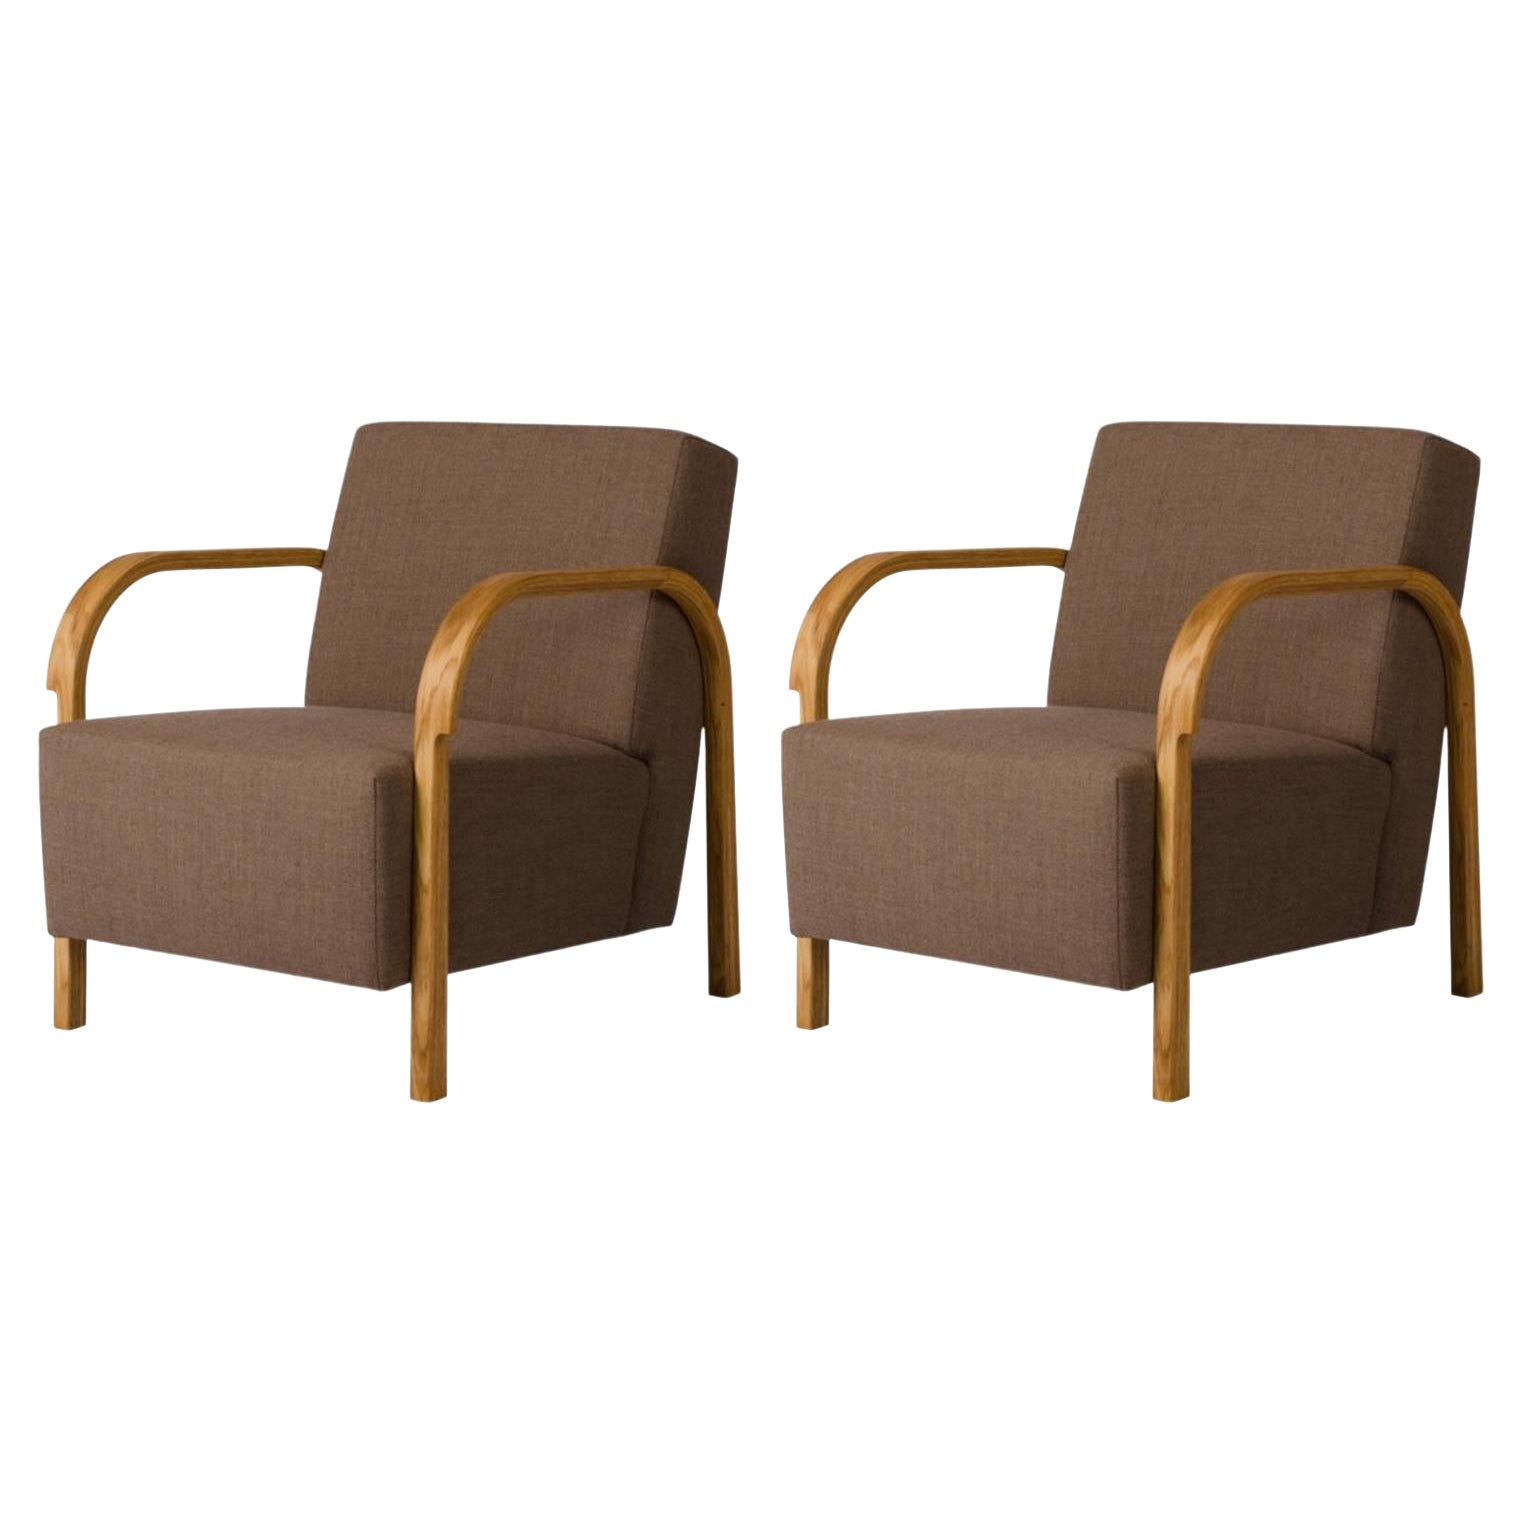 Set of 2 Kvadrat / Hallingdal & Fiord Arch Lounge Chairs by Mazo Design For Sale